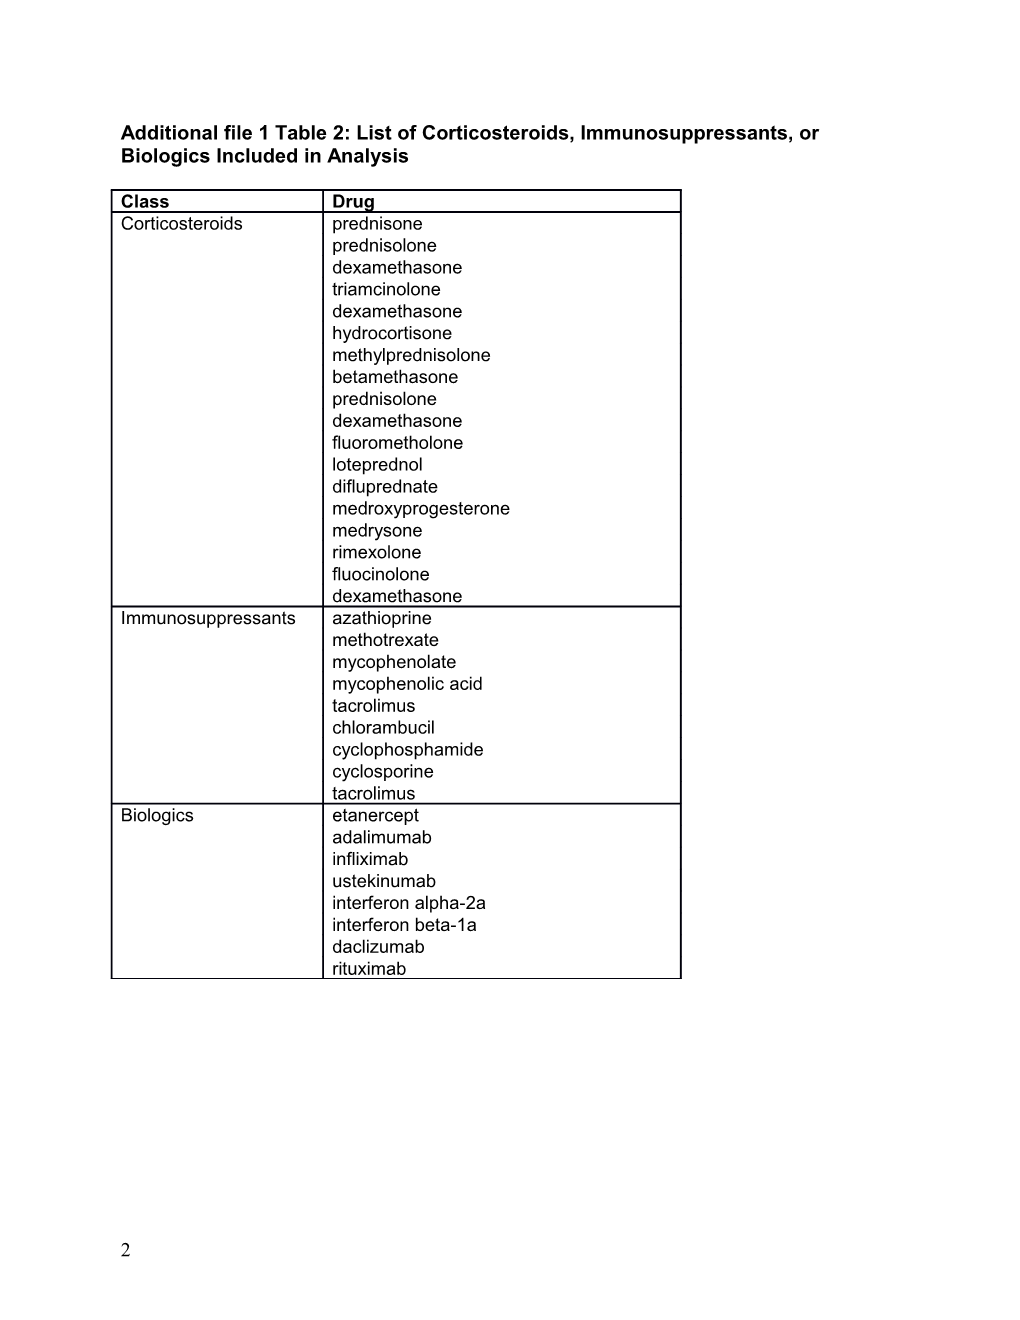 Additional File 1Table 1. ICD-9-CM Diagnosis Codes Used to Identify Non-Infectious Uveitis